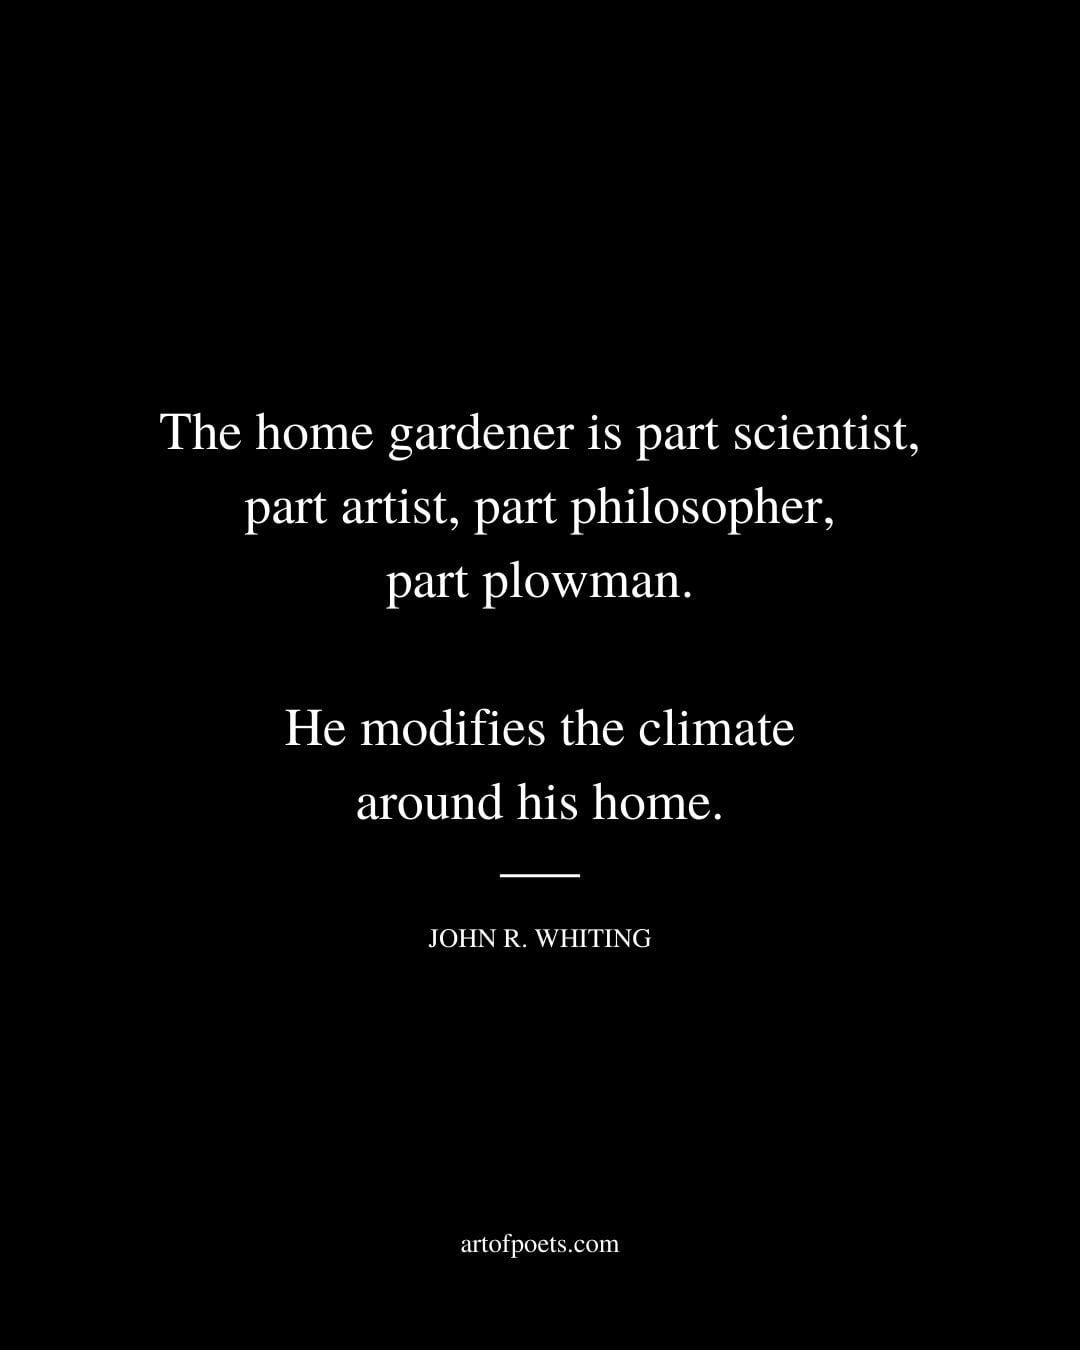 The home gardener is part scientist part artist part philosopher part plowman. He modifies the climate around his home. John R. Whiting